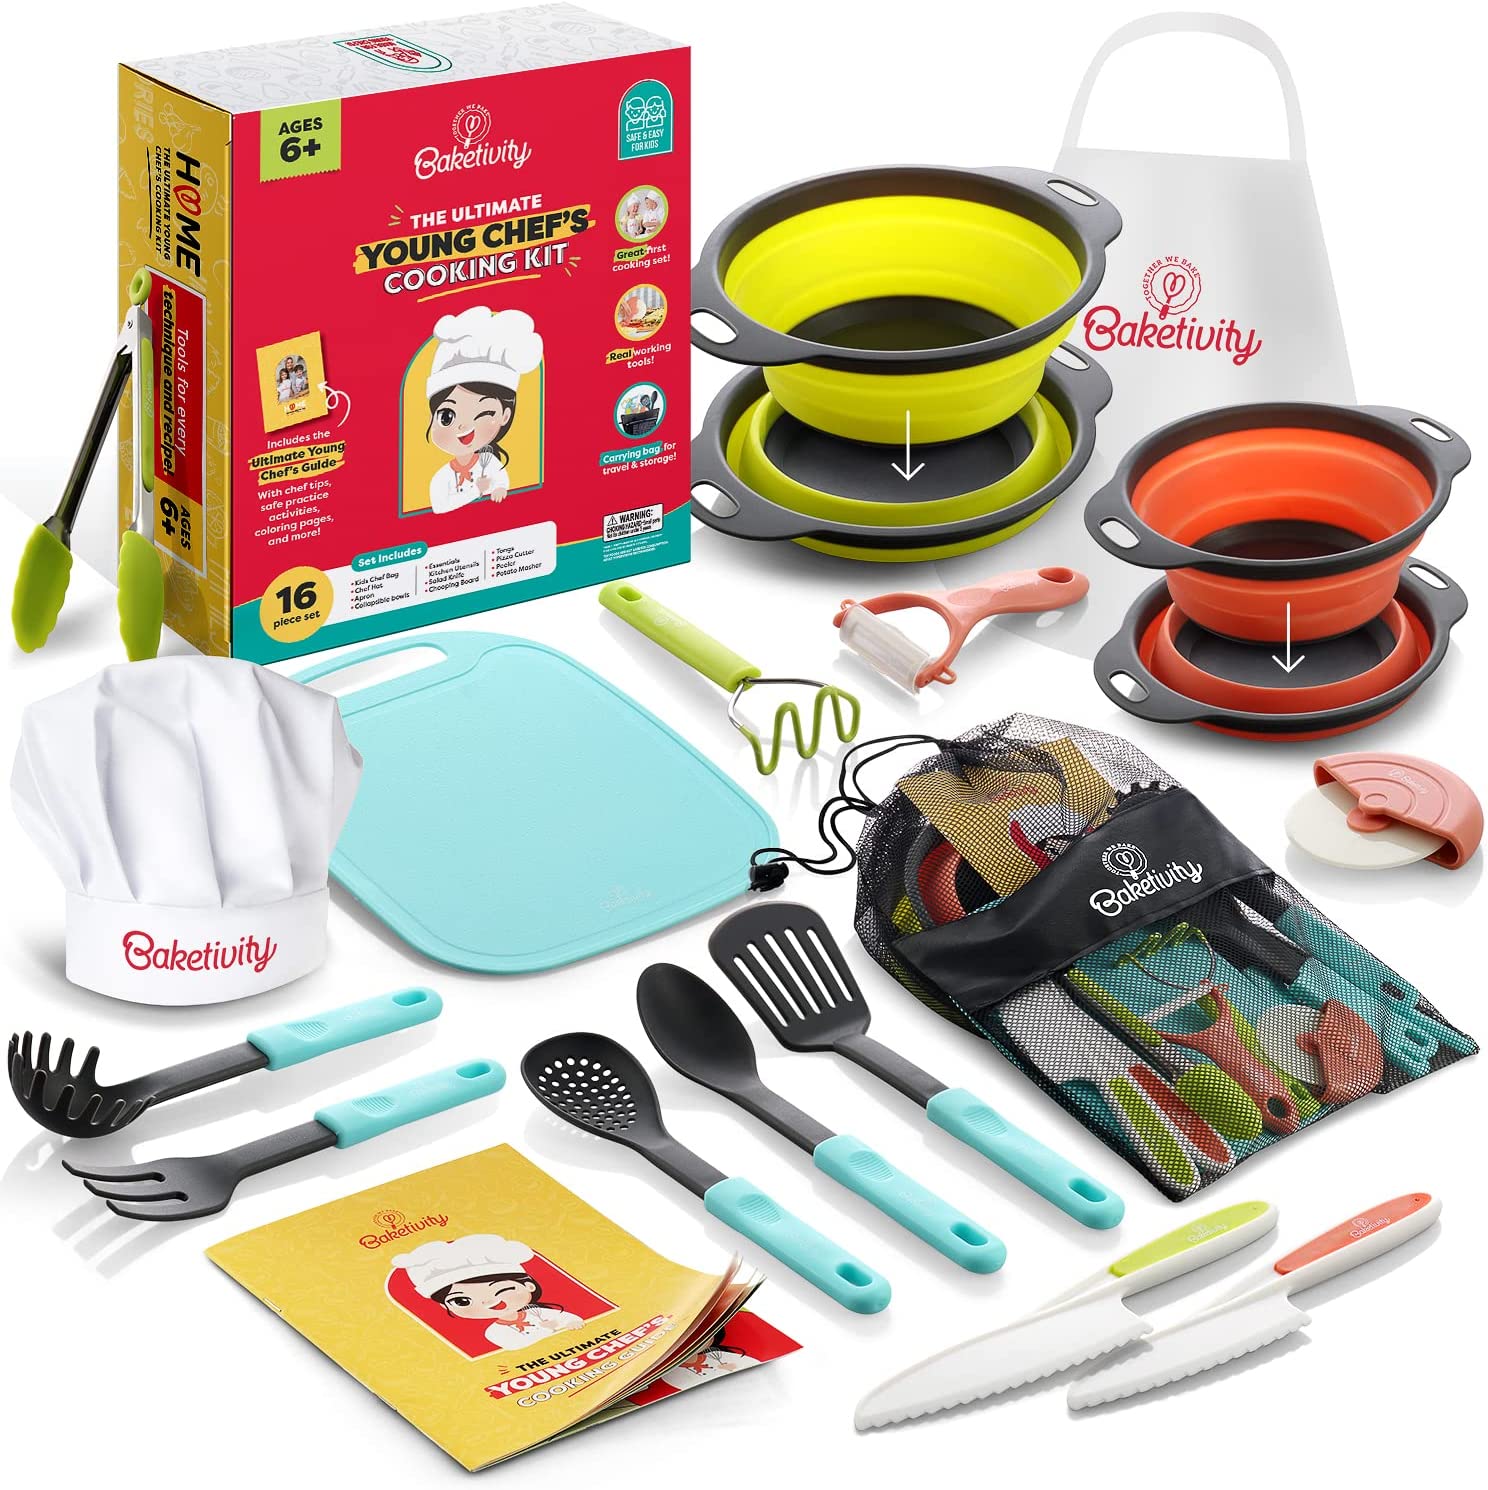 15 Kids Cooking Sets for Your Little Chefs - Tinybeans